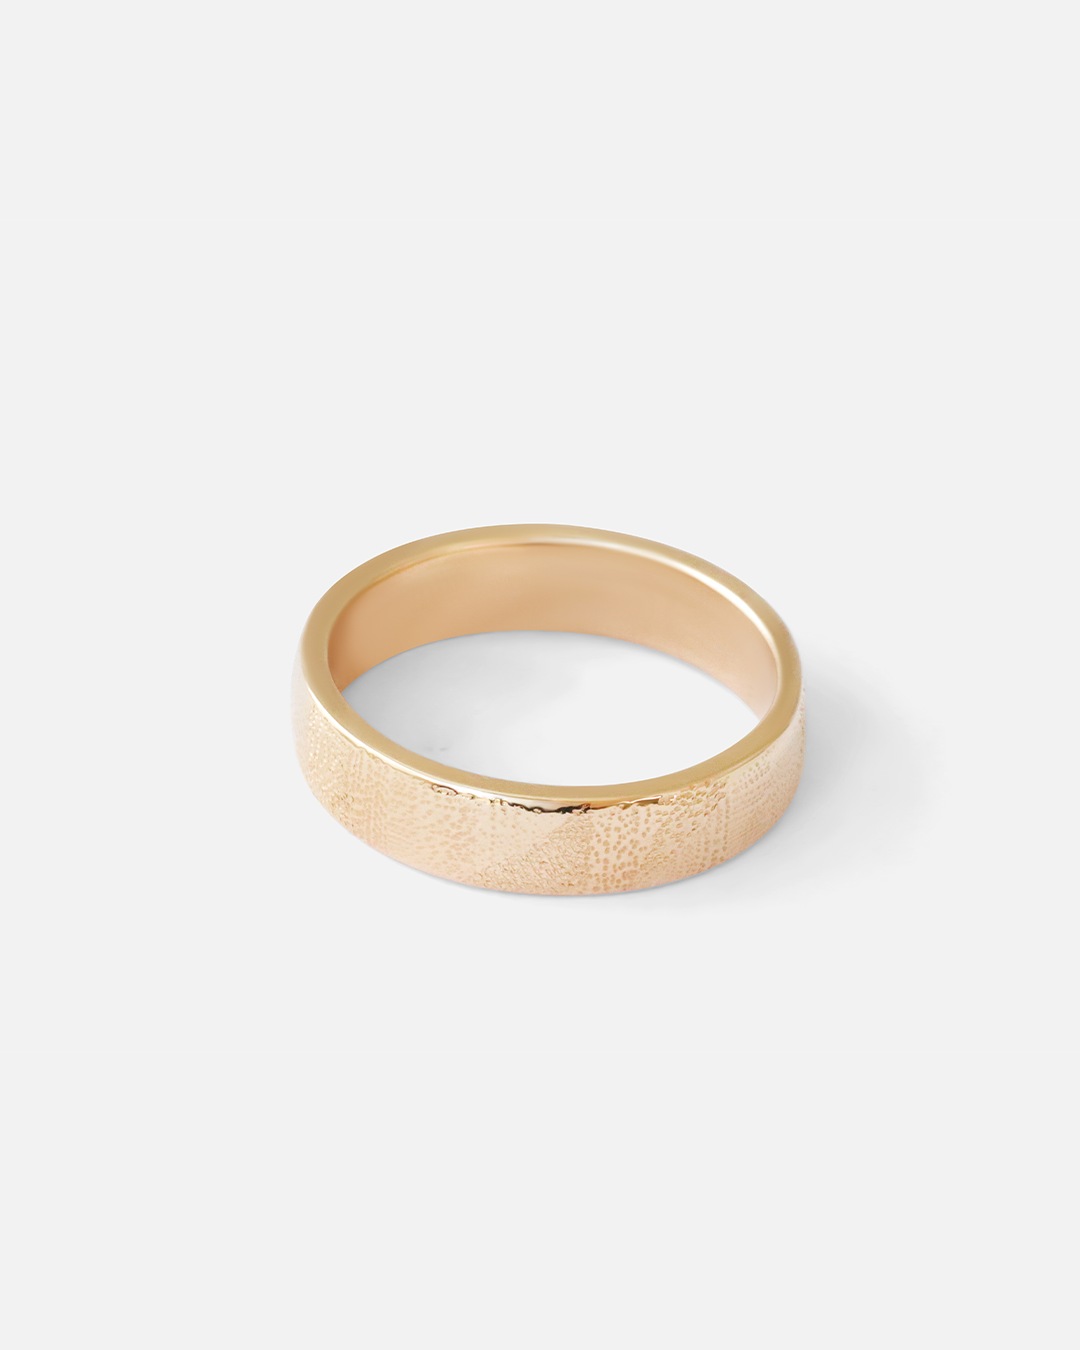 All that Glitters Band / 5mm By Young Sun Song in Wedding Bands Category